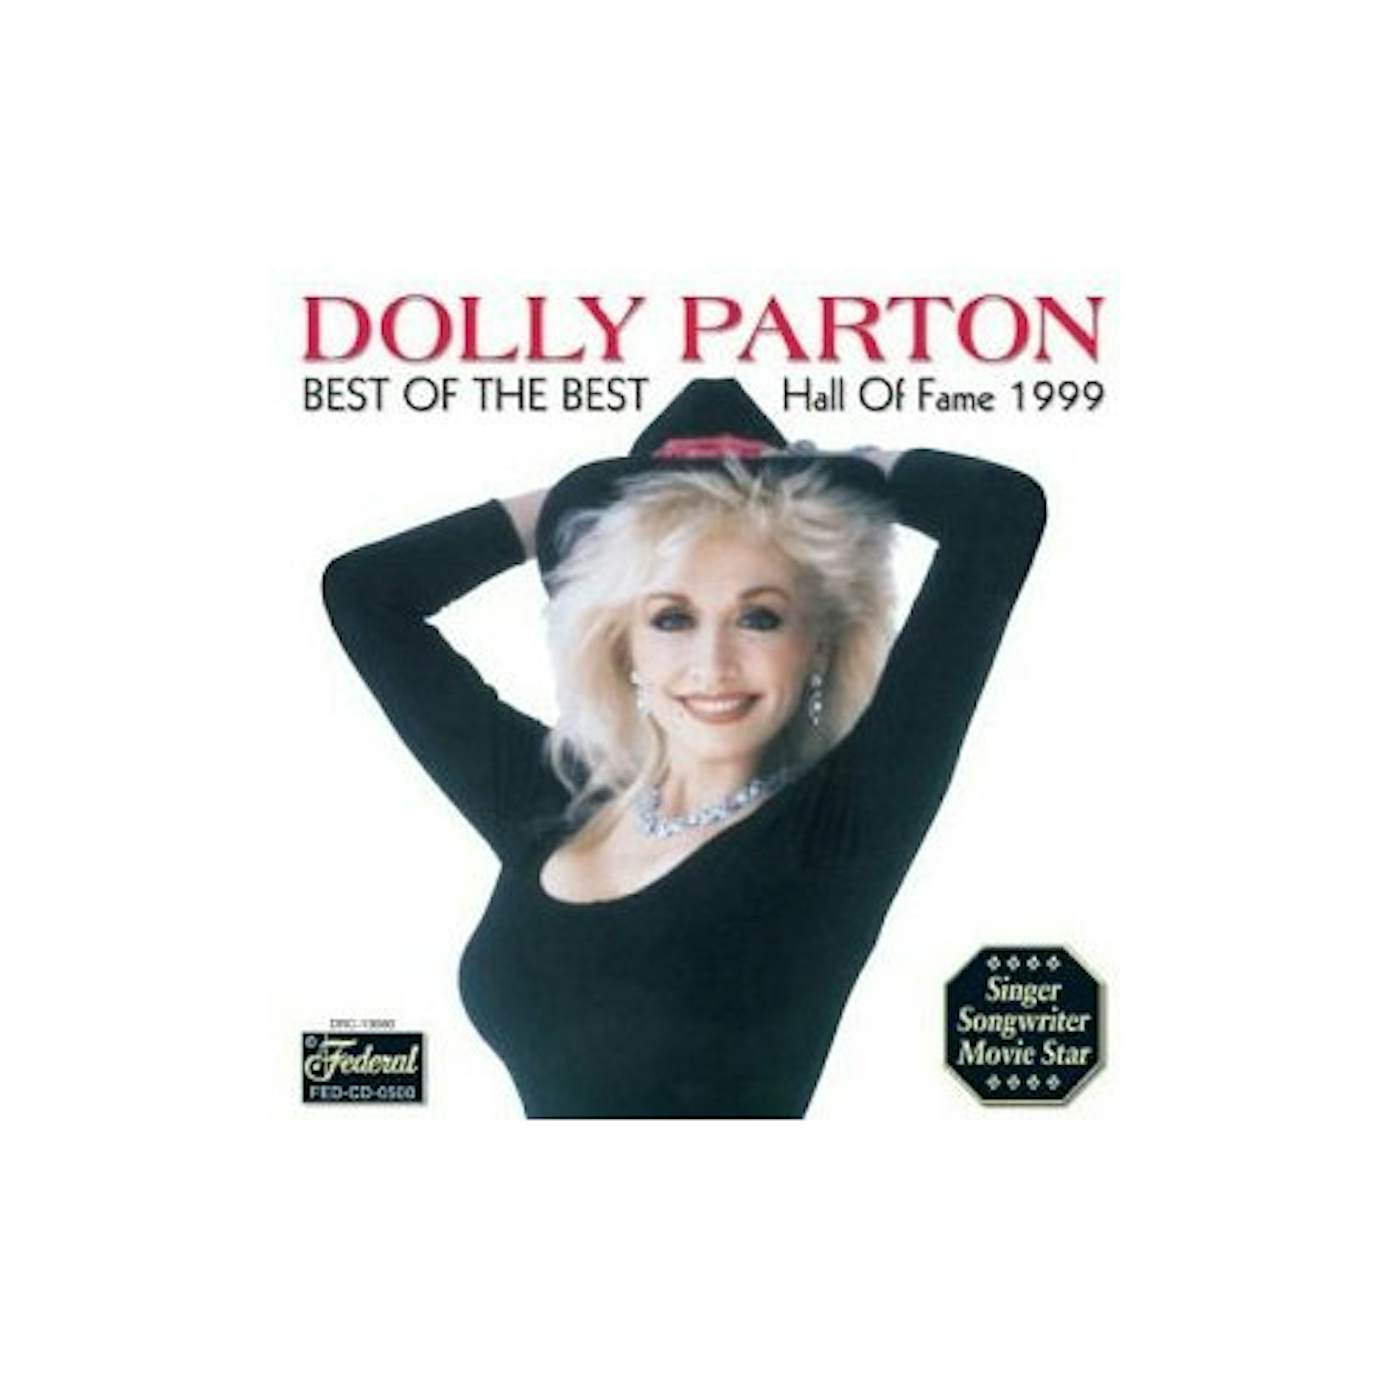 Dolly Parton BEST OF THE BEST: HALL OF FAME 2000 CD